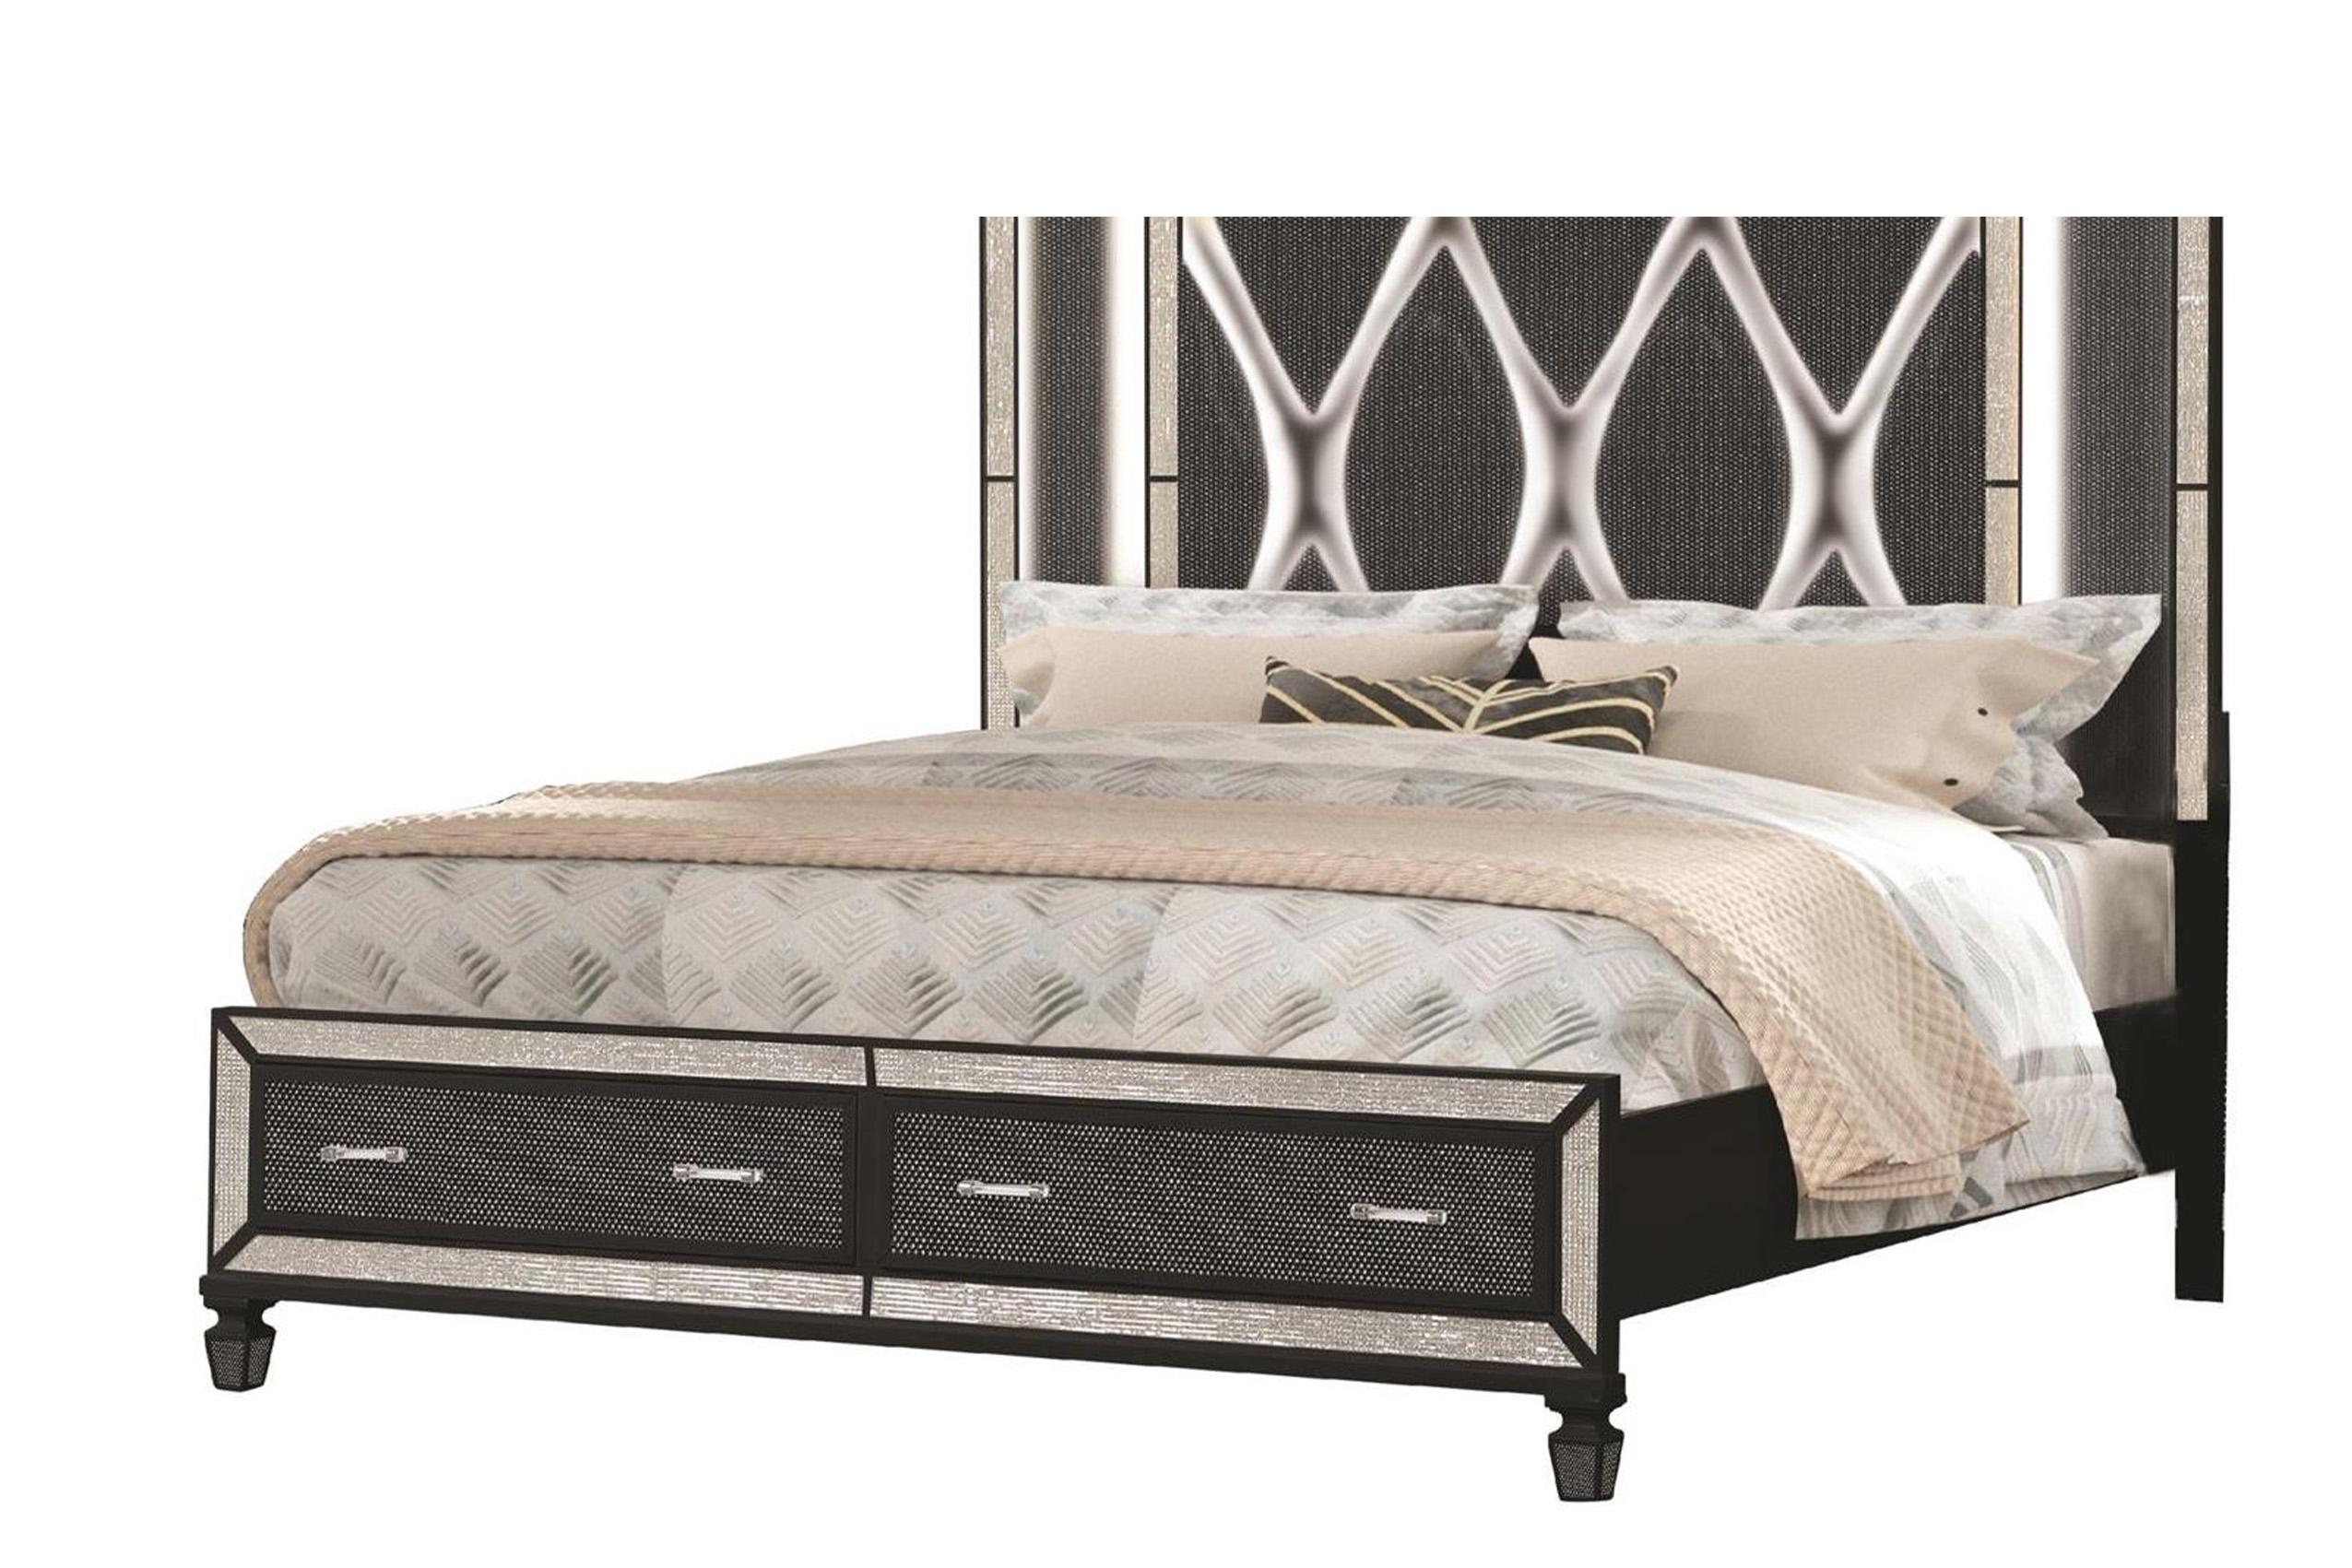 

    
Glam Black Solid Wood Queen Bed Set 4Pcs CRYSTAL Galaxy Home Modern Contemporary
